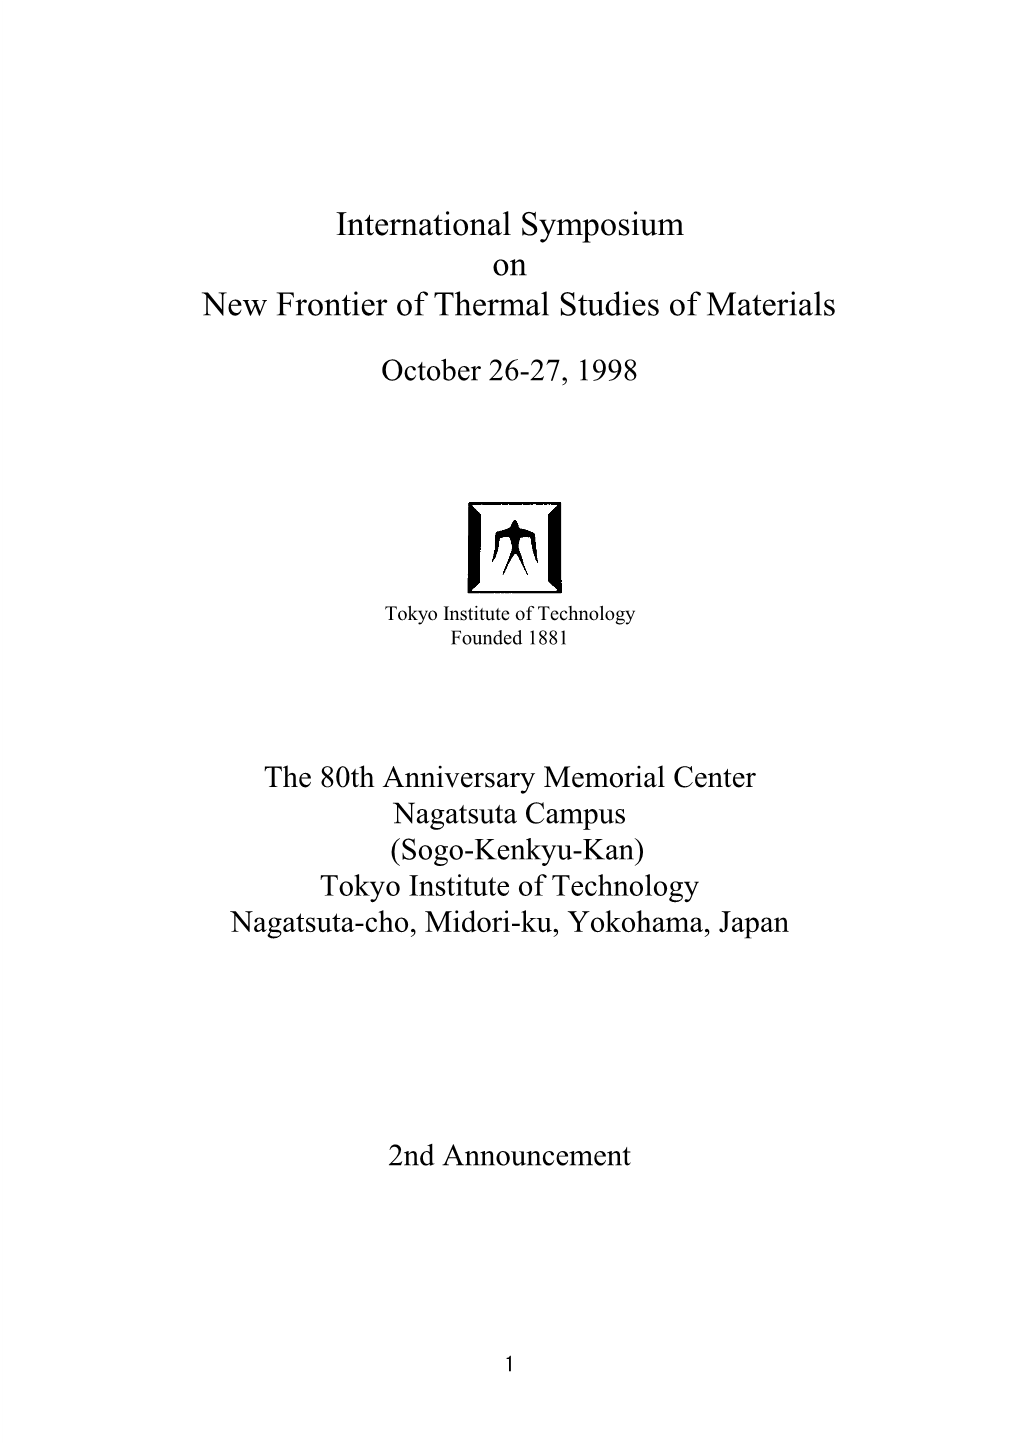 International Symposium on New Frontier of Thermal Studies of Materials